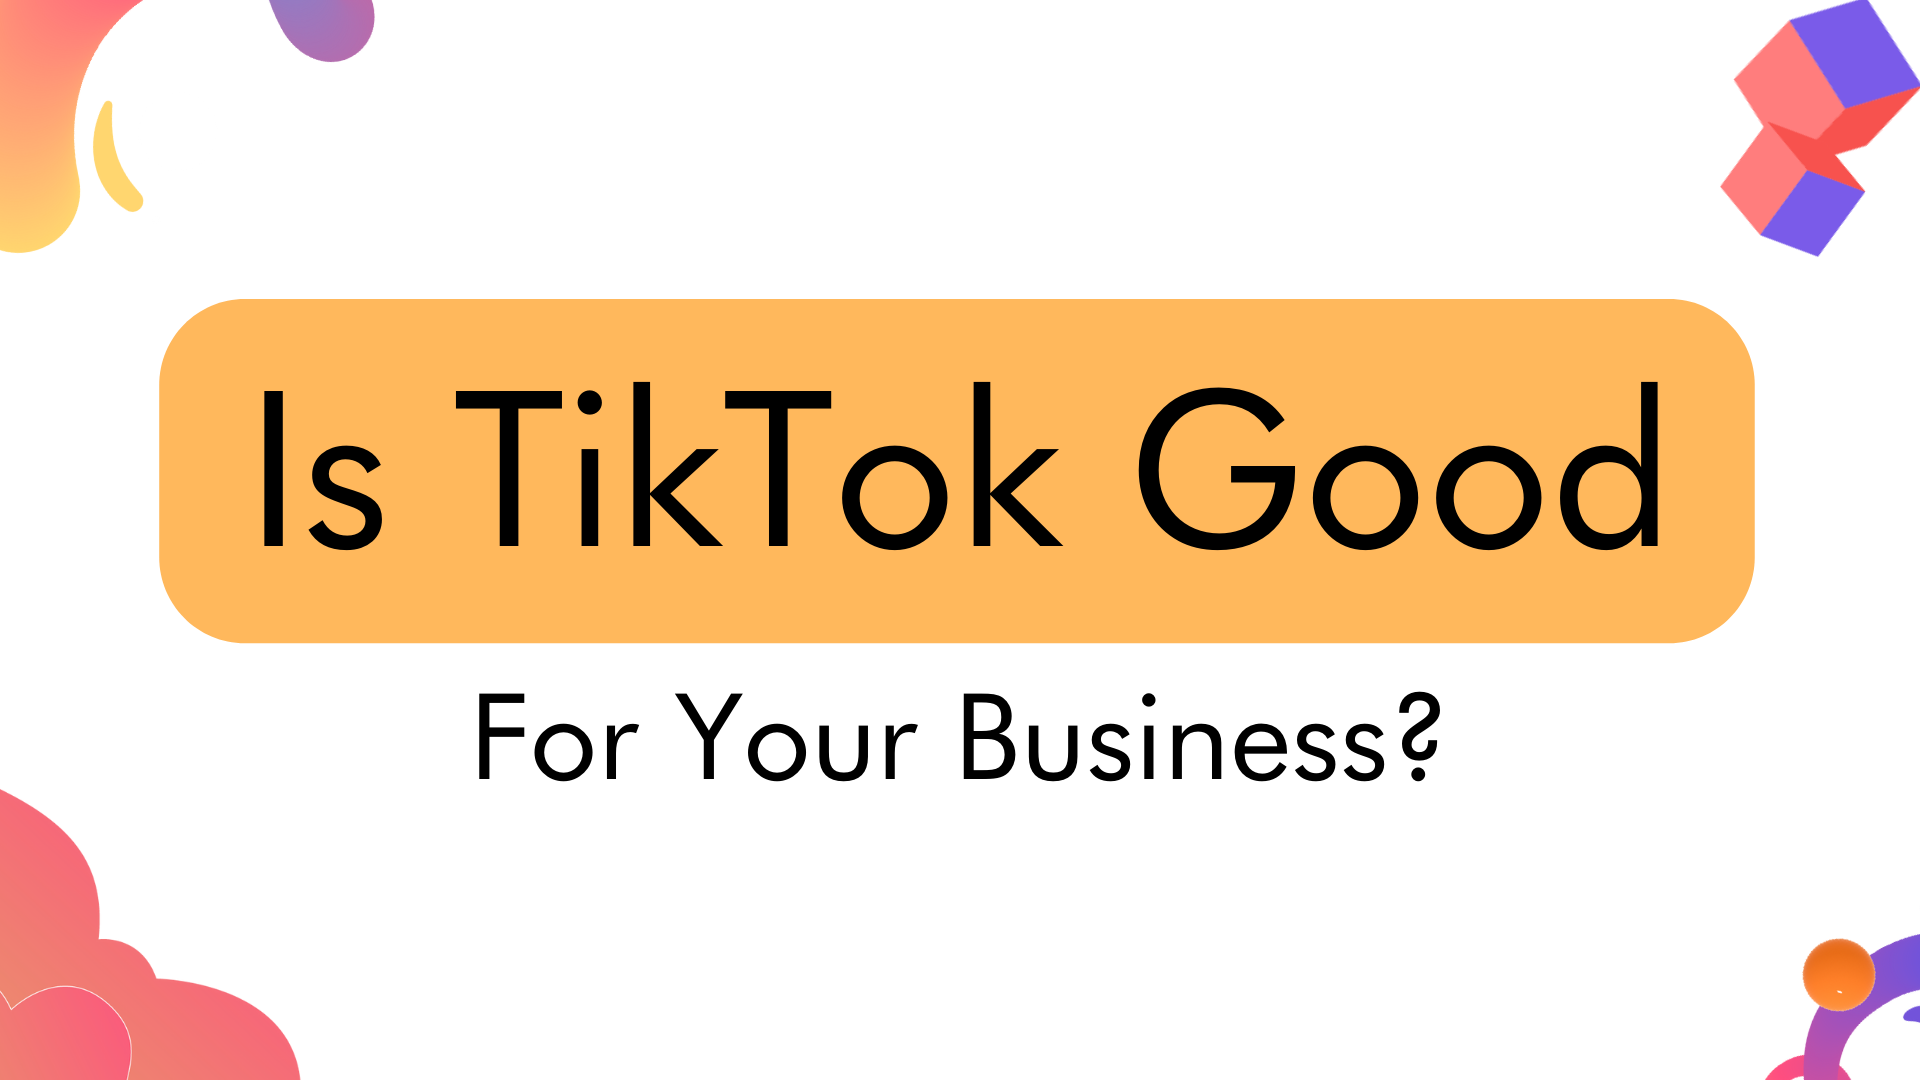 is tiktok good for your business?